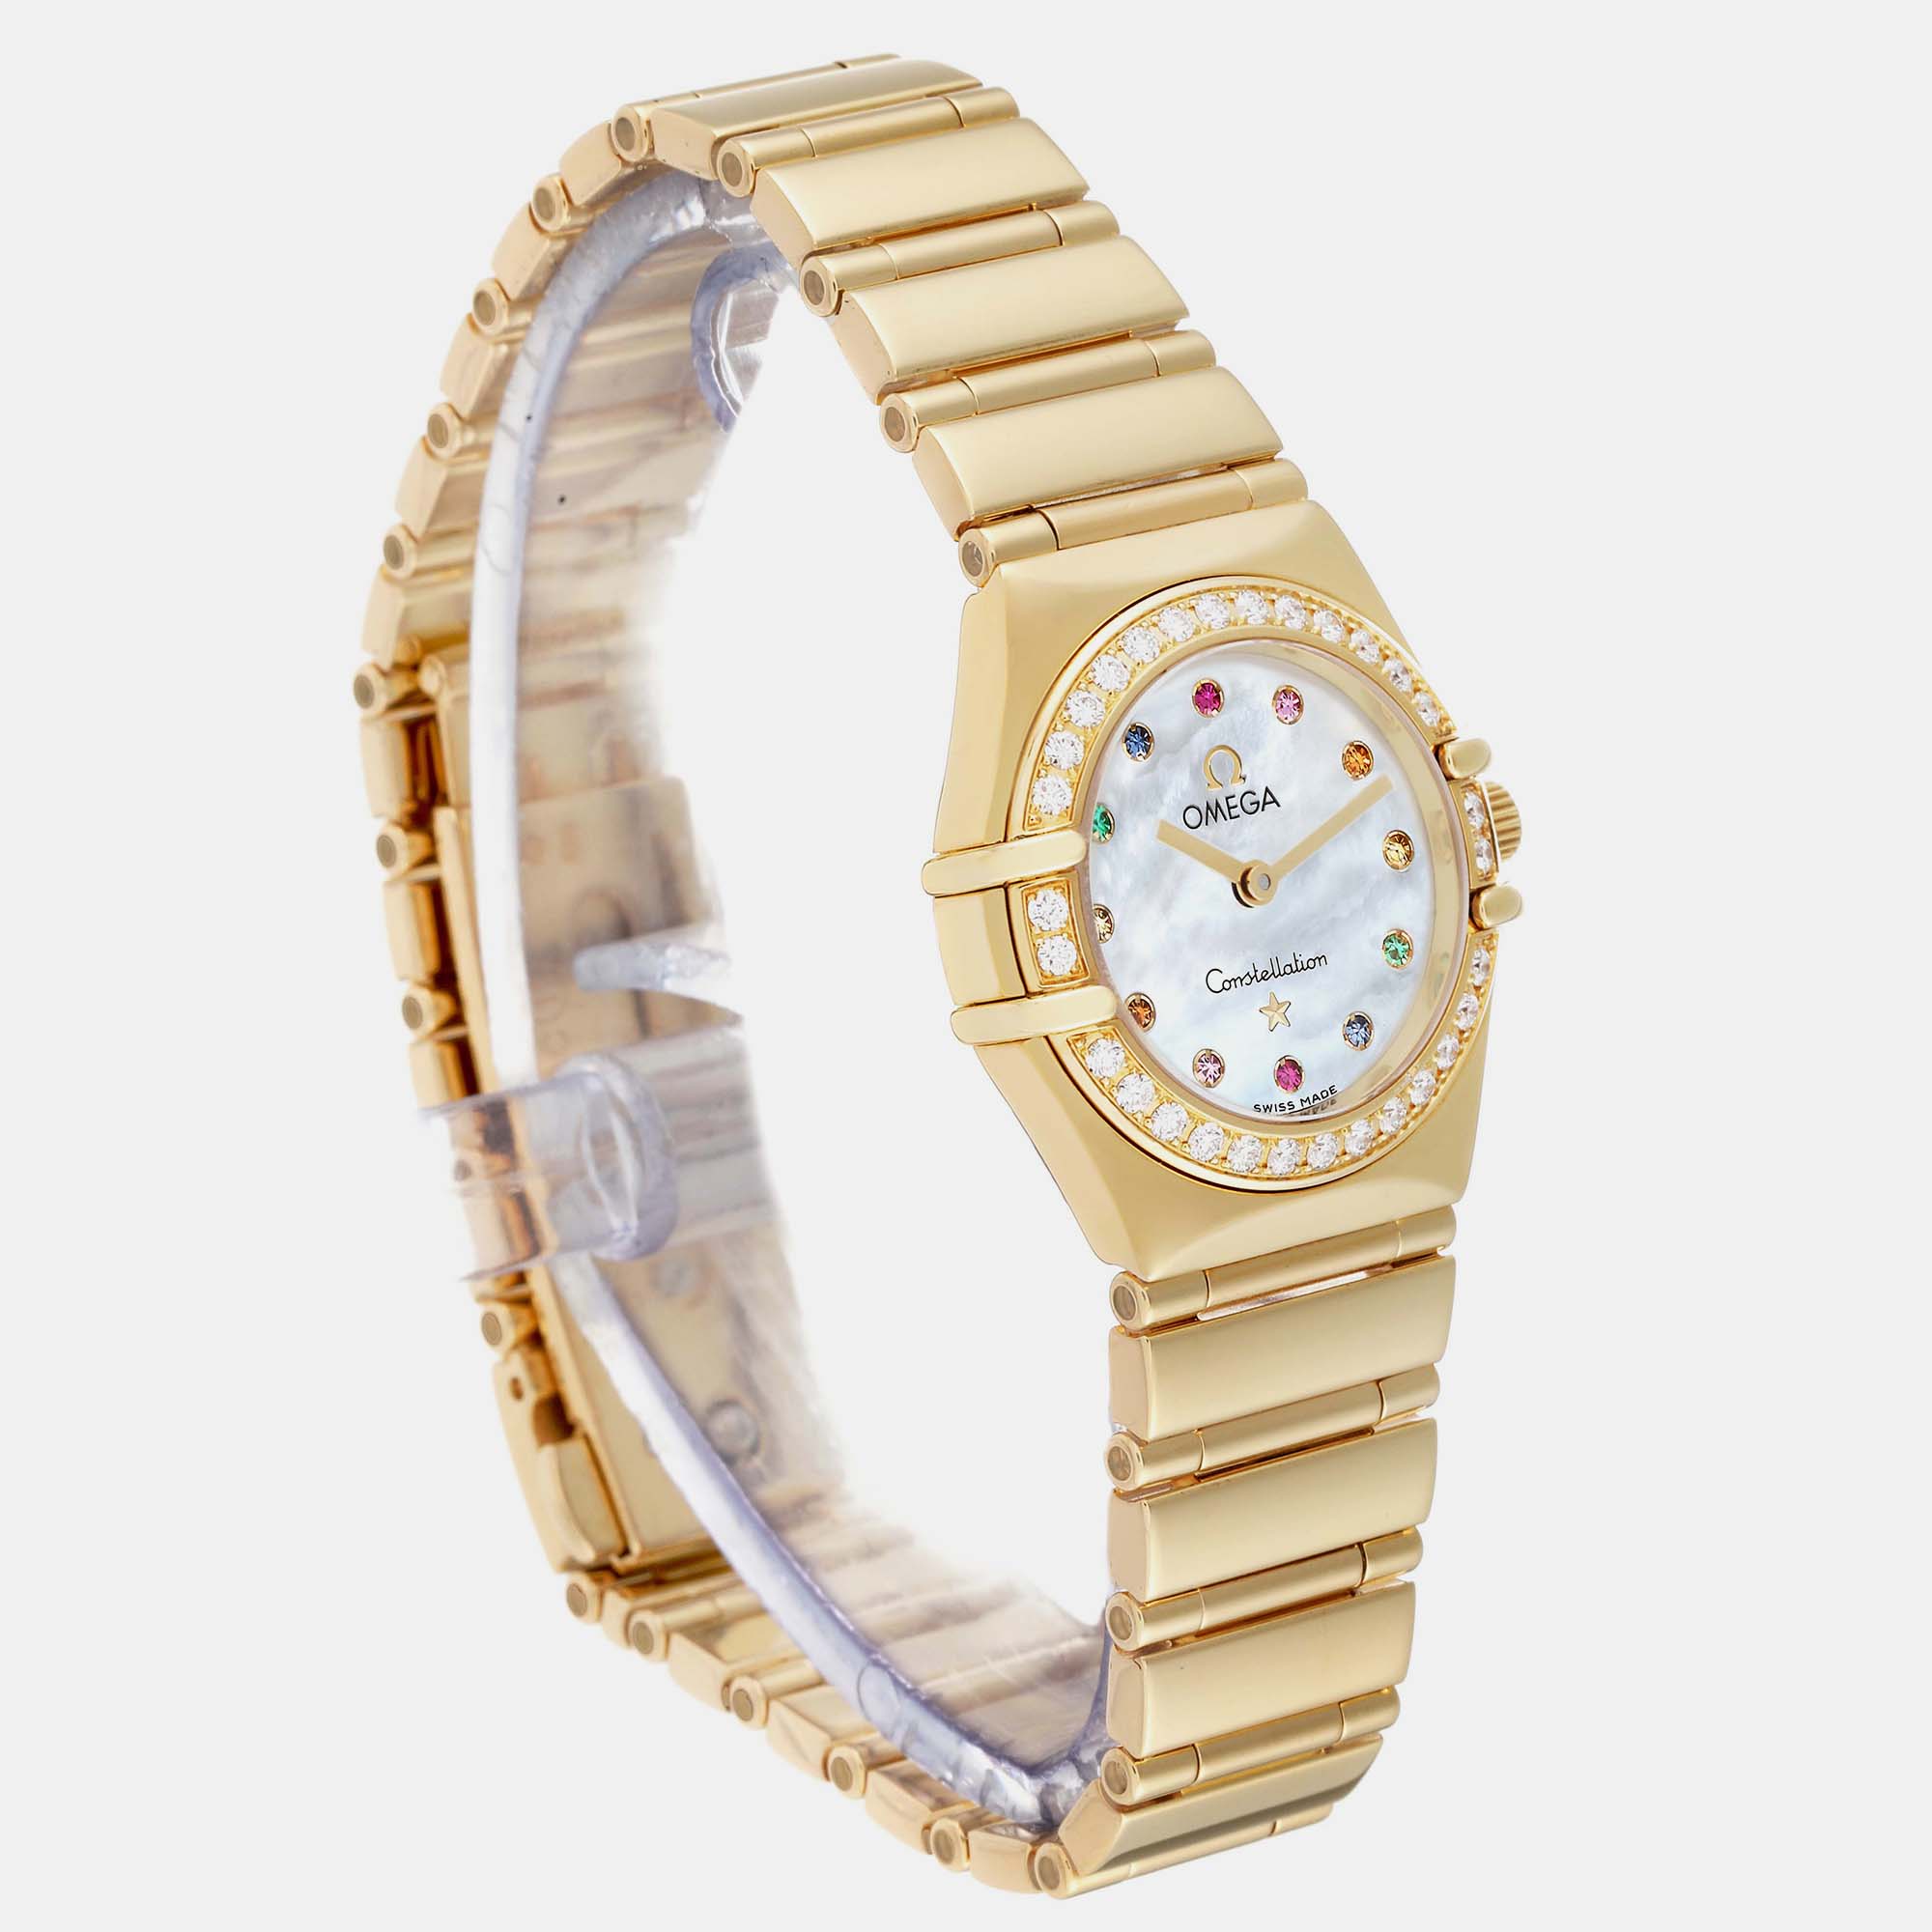 Omega Mother Of Pearl Diamond Constellation 1164.79.00 Automatic Women's Wristwatch 22.5 Mm